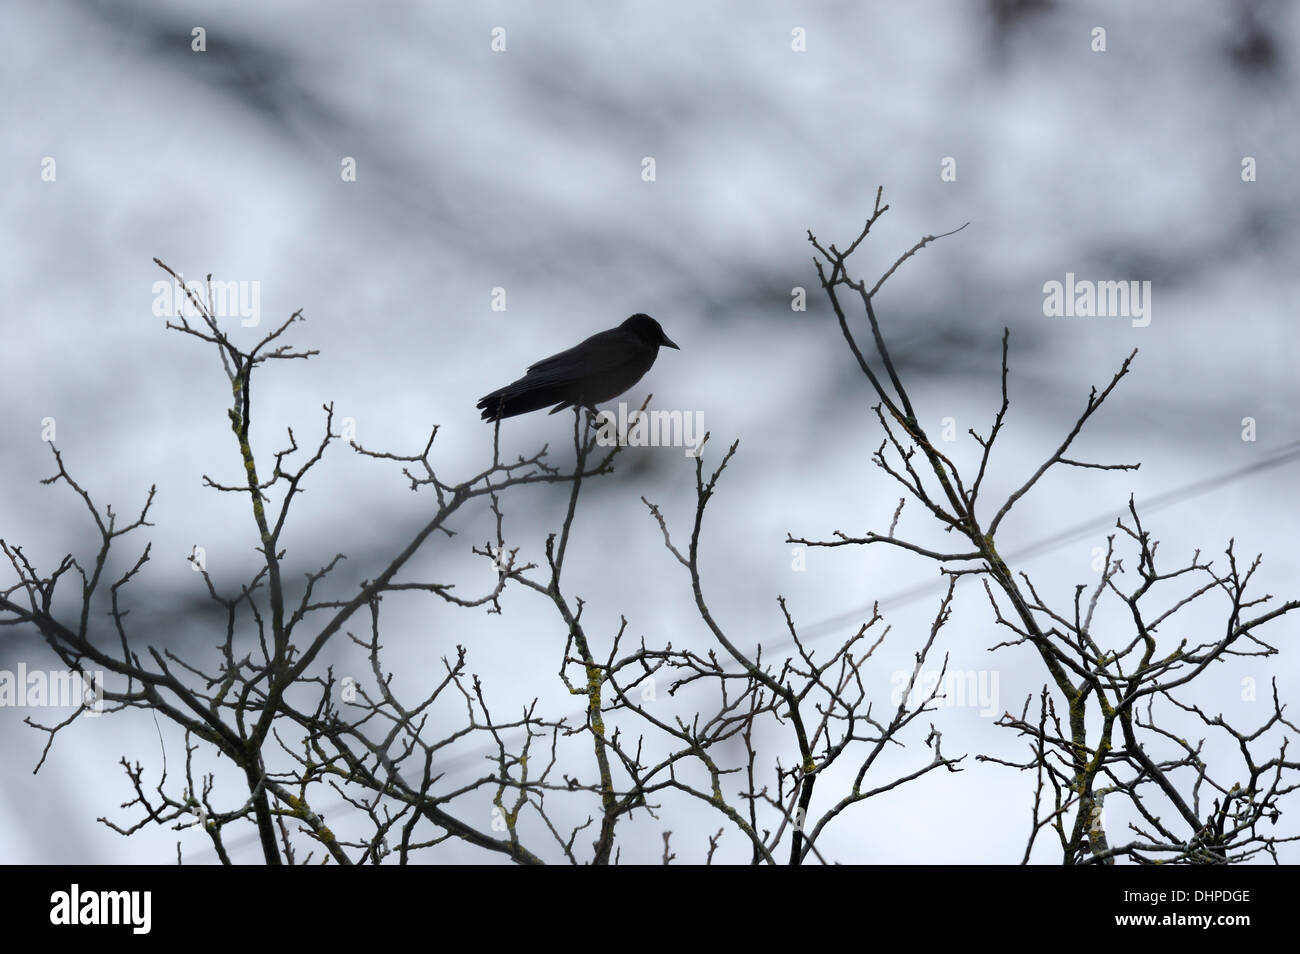 crow sitting on top of a leafless tree in bad stormy weather Stock Photo